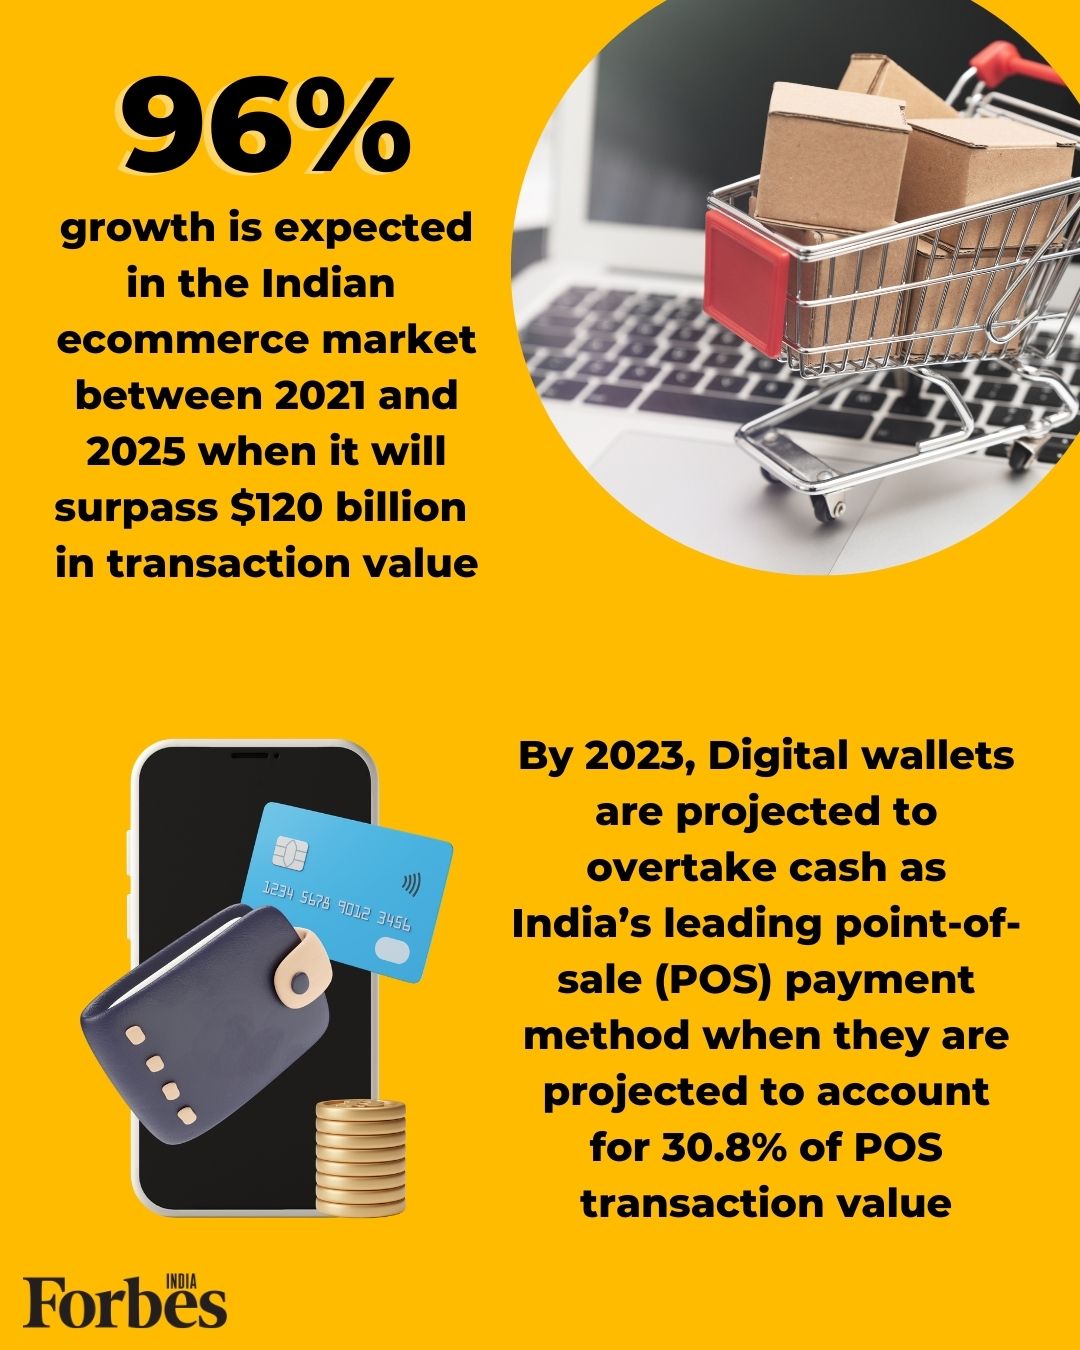 Indian ecommerce market to grow by 96% between 2021 and 2025: report